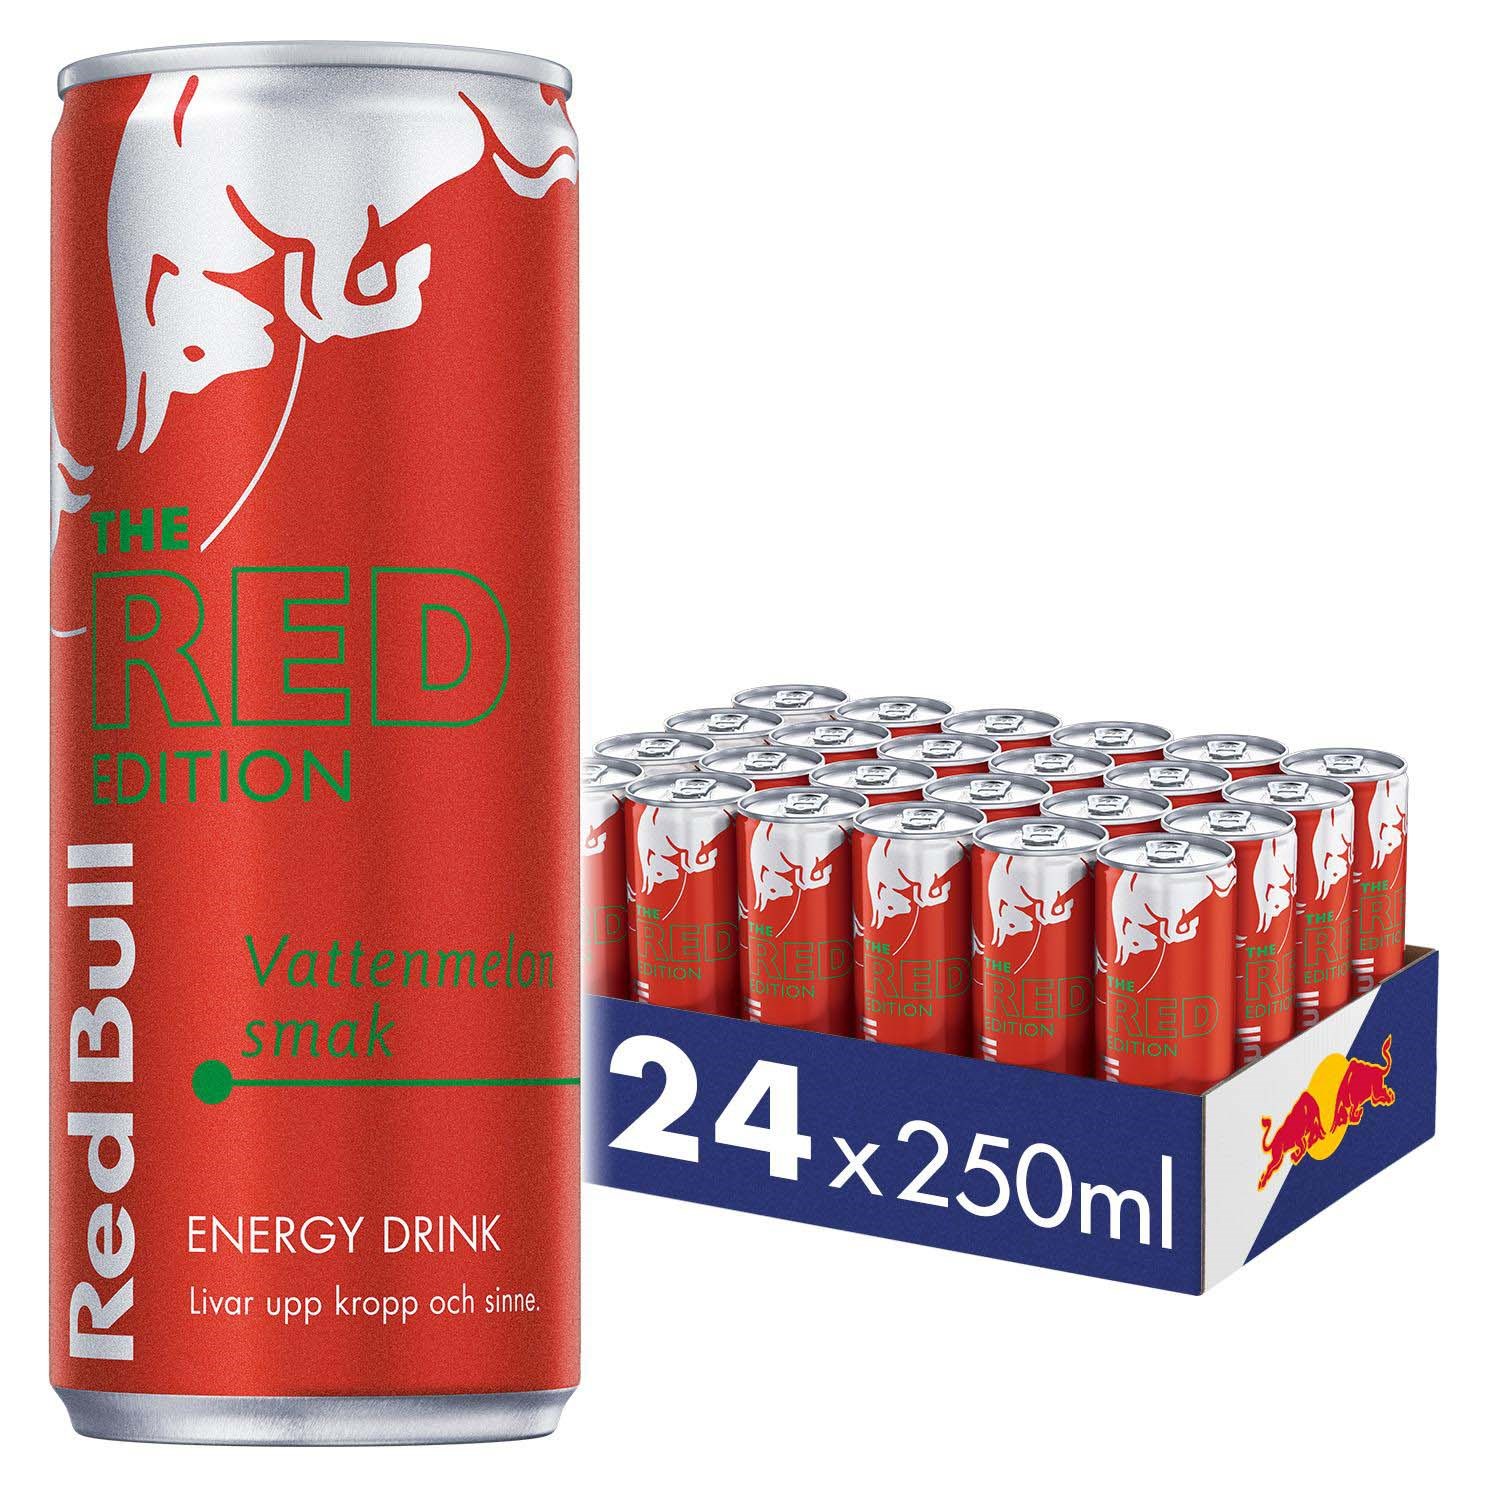 Red Bull Red Edition, 24x250ml